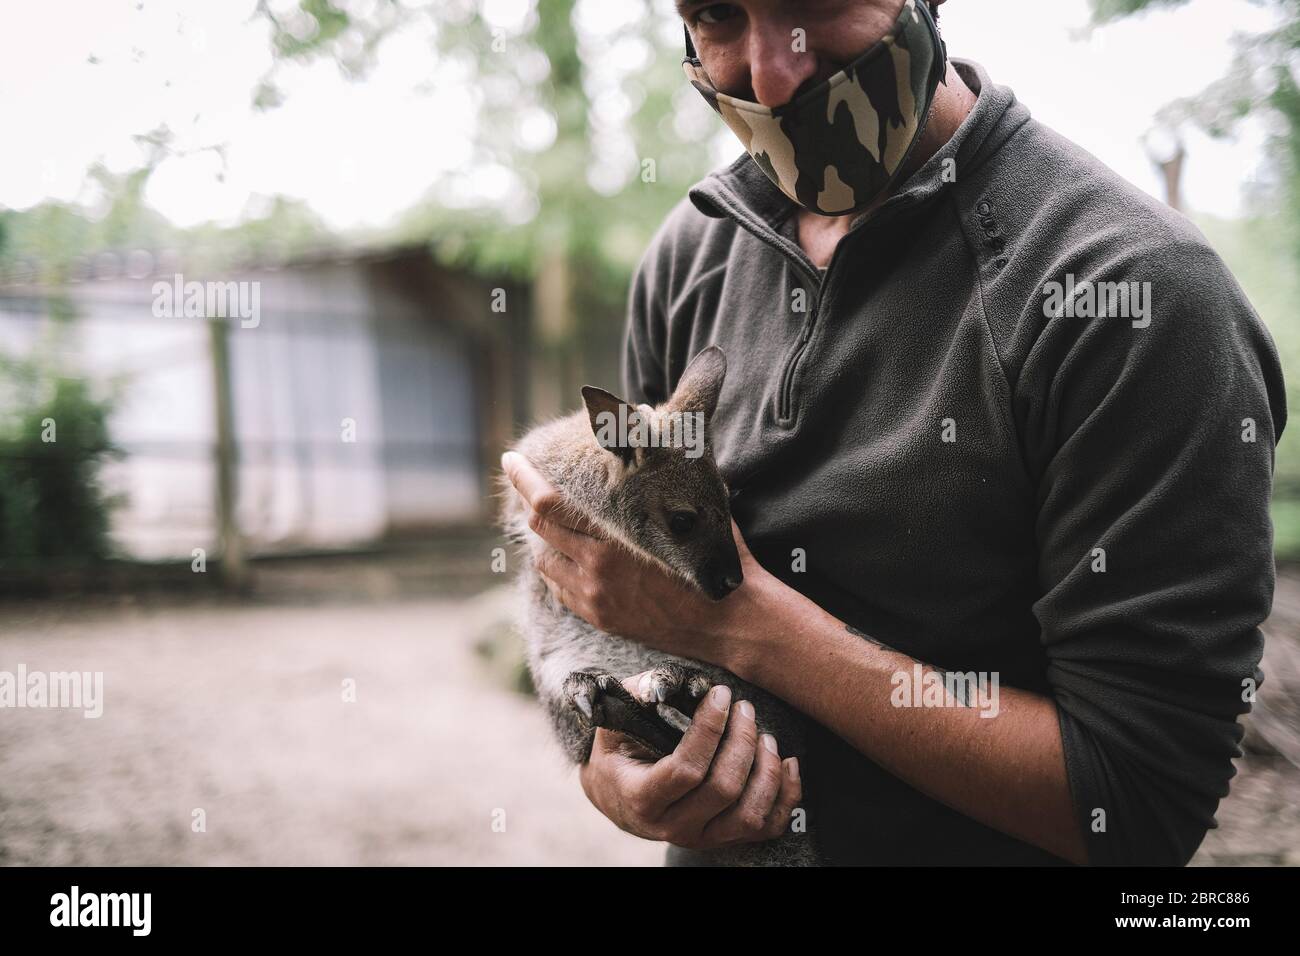 Murazzano, Italy. 20th May, 2020. A staff member pets a kangaroo cub at Langhe safari park in Murazzano, Italy, May 20, 2020. The Langhe safari park has been closed since March due to the COVID-19 pandemic. In order to continue feeding and taking care of the animals, the park has to seek help from restaurateurs, farmers and shopkeepers to donate food to feed the animals. Credit: Federico Tardito/Xinhua/Alamy Live News Stock Photo